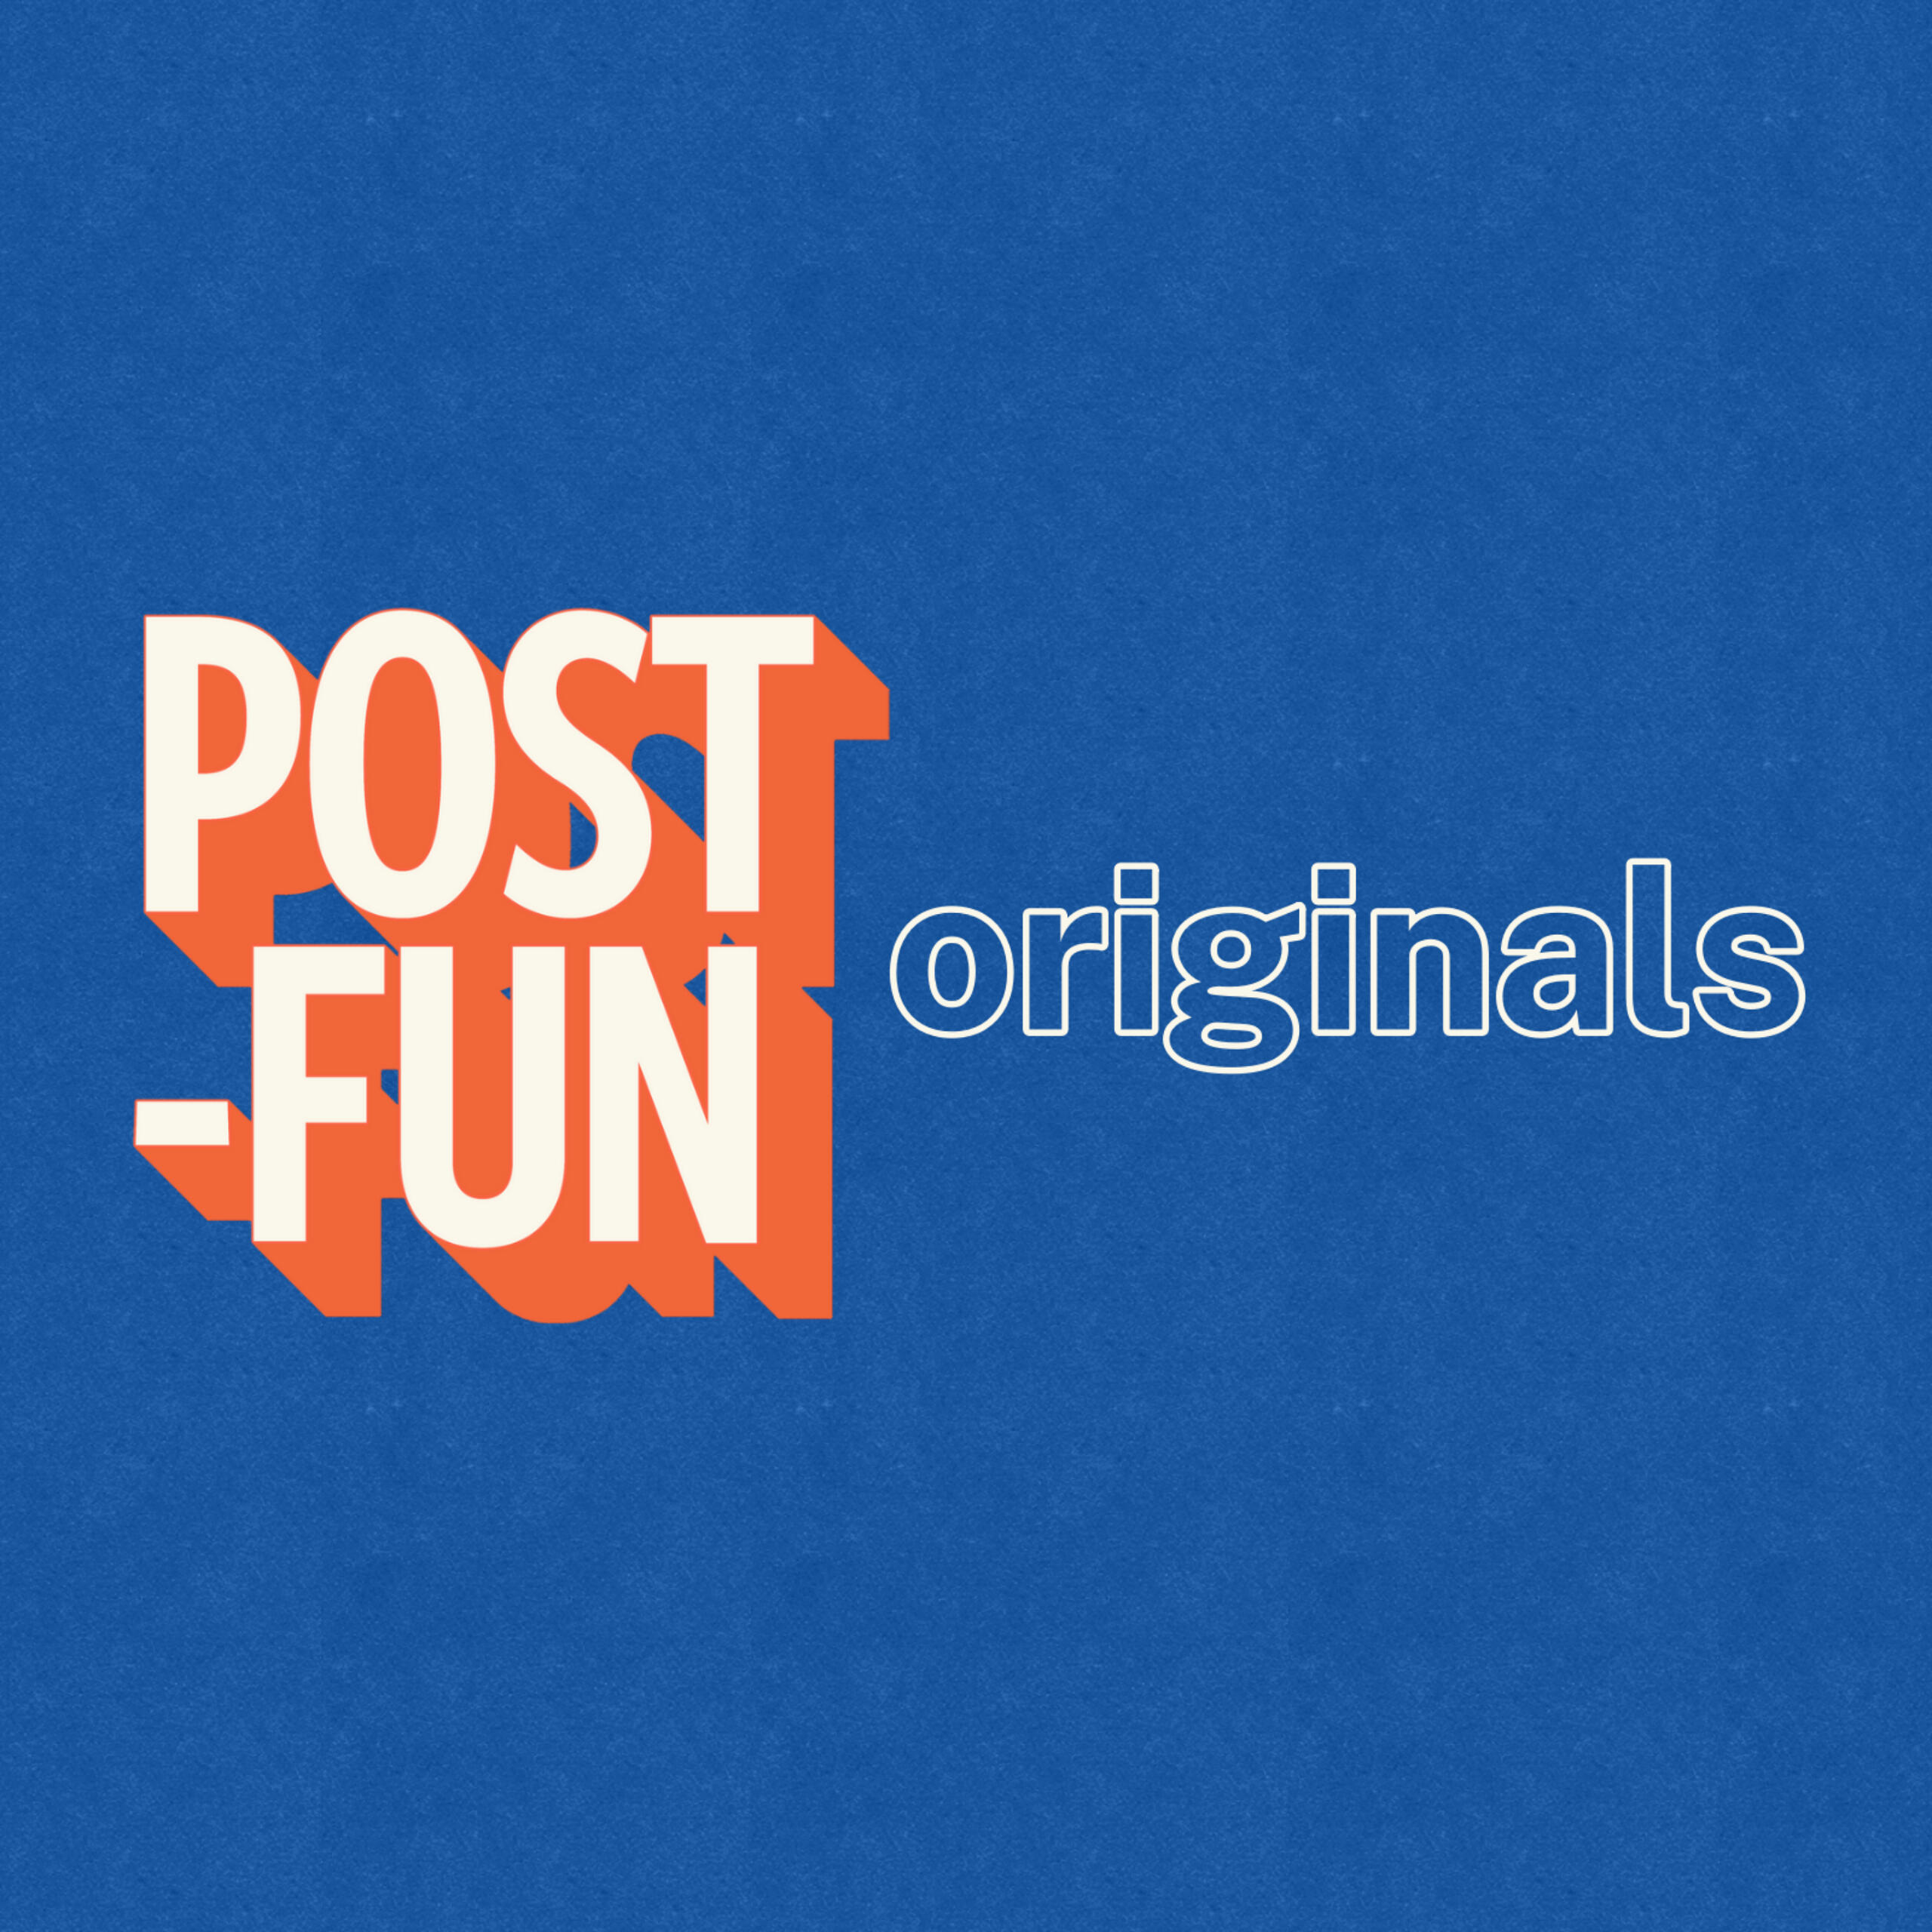 Post-Fun Podcasts | Post-Fun Originals, an anthology podcast